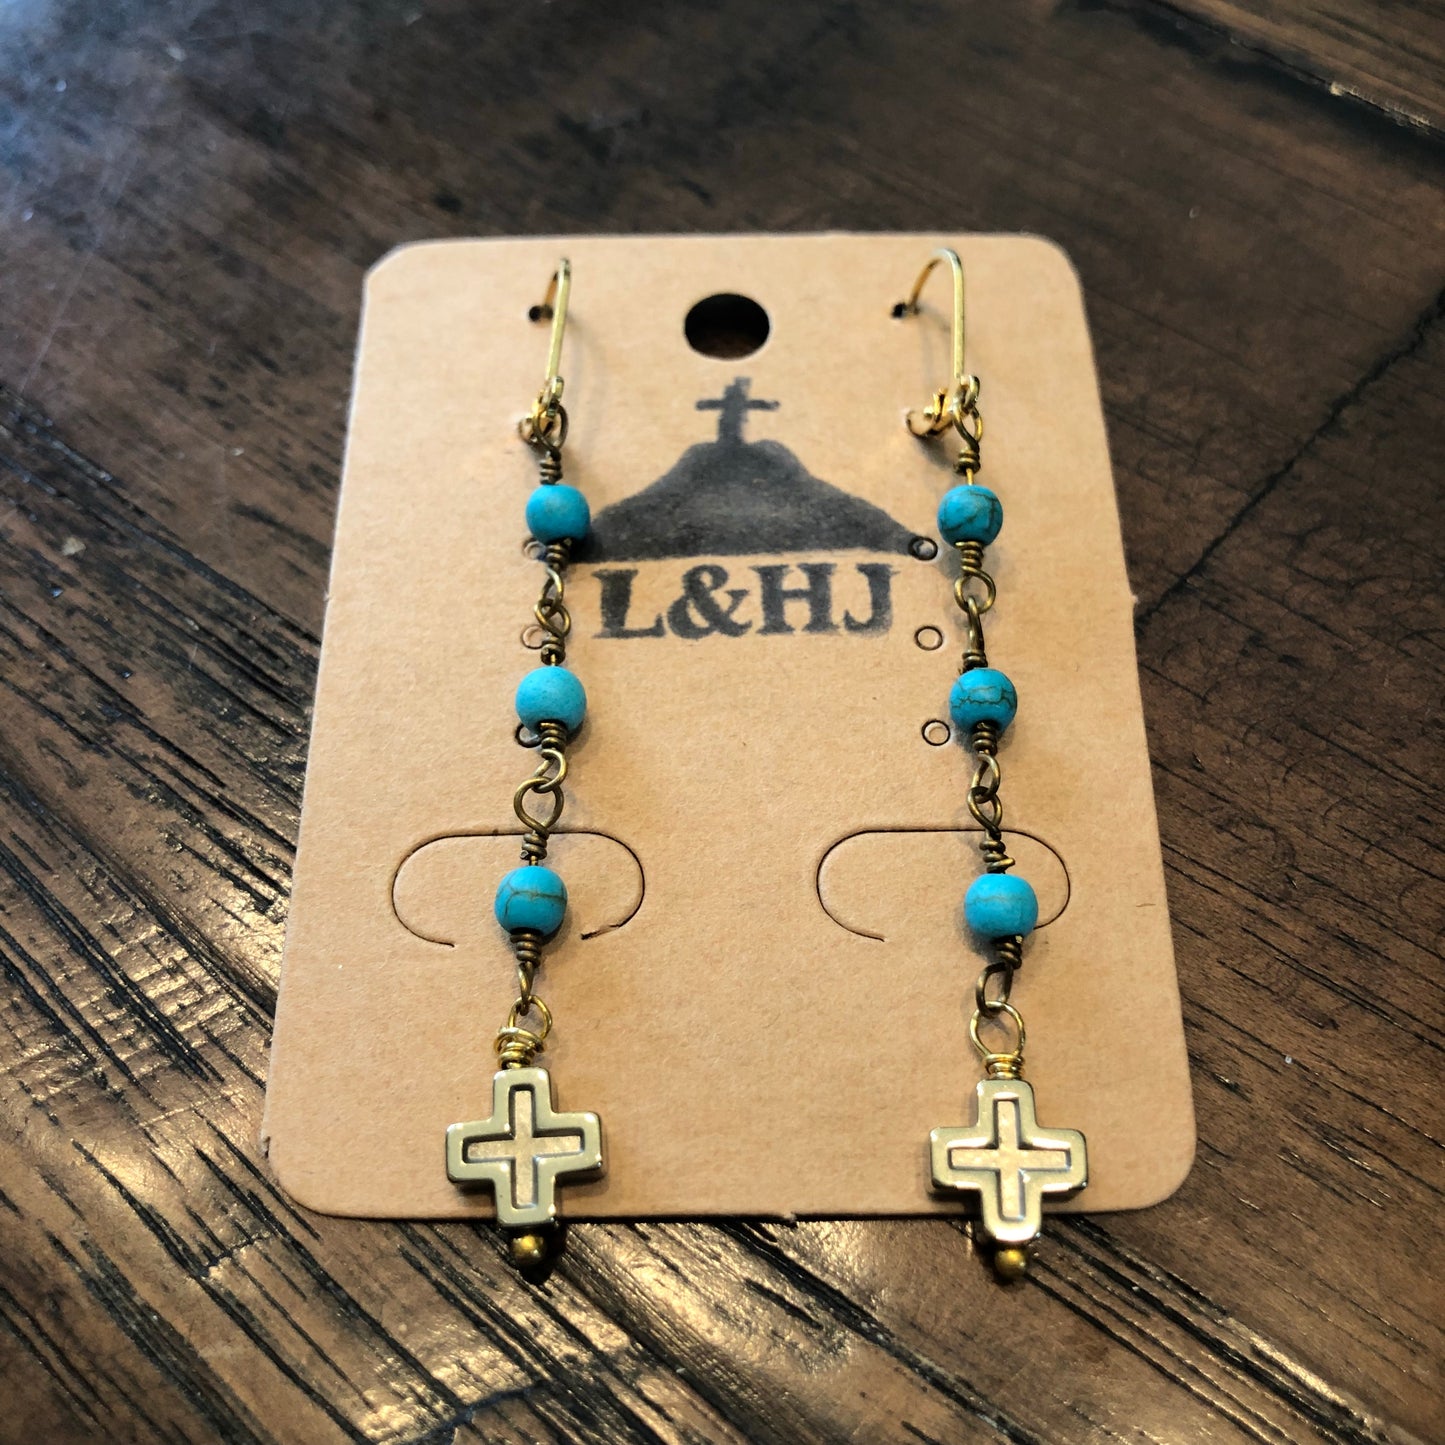 Small Acts of Mercy Earrings